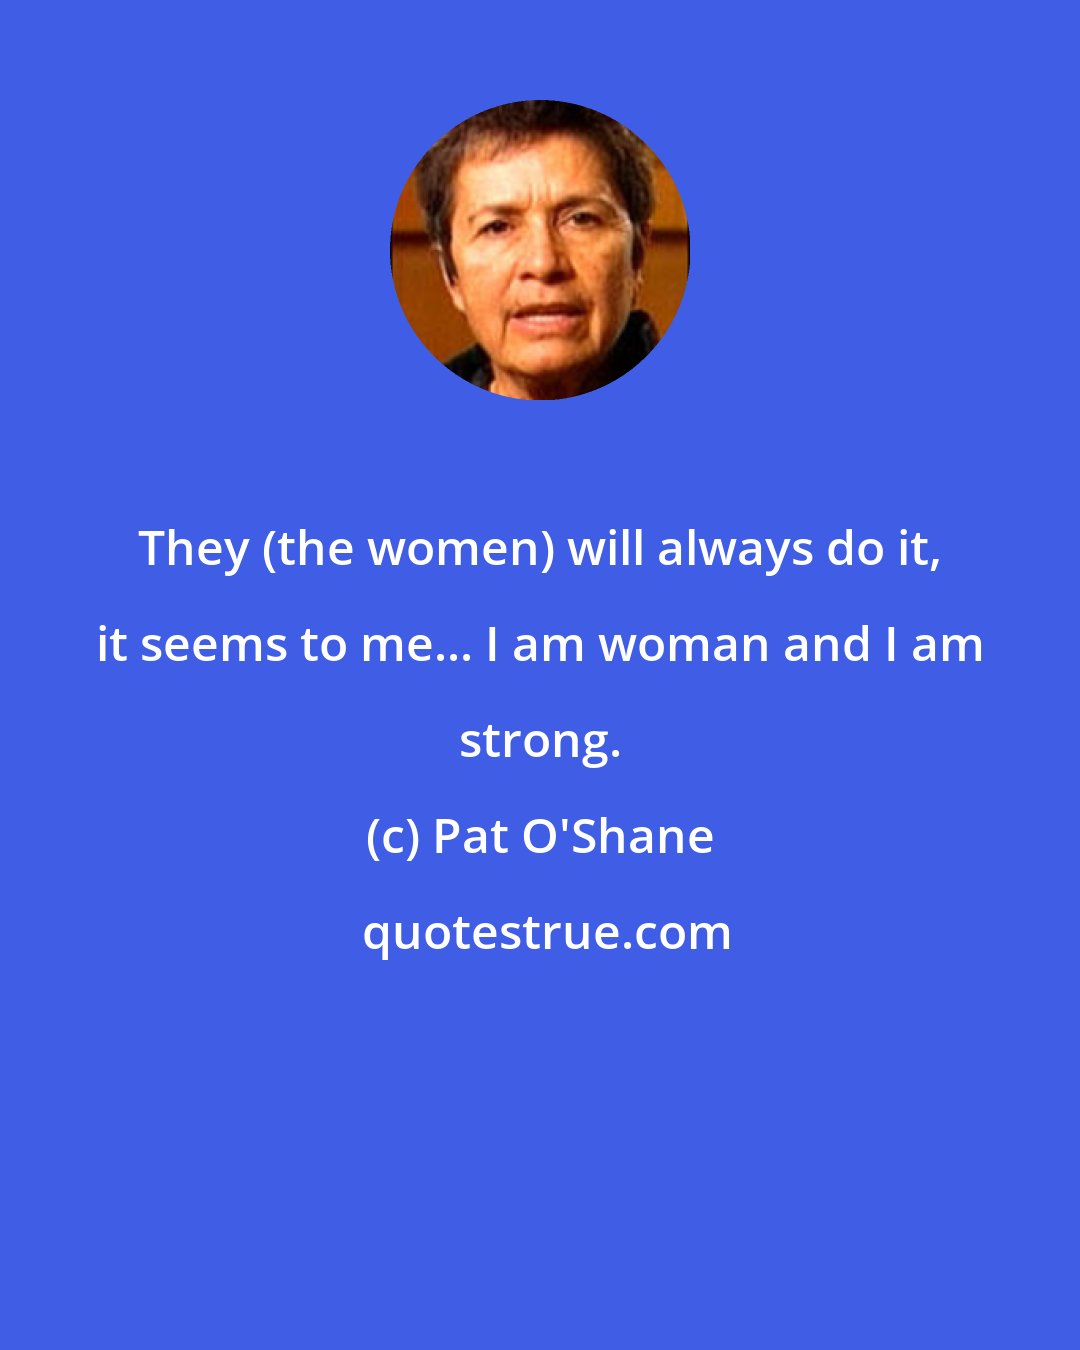 Pat O'Shane: They (the women) will always do it, it seems to me... I am woman and I am strong.